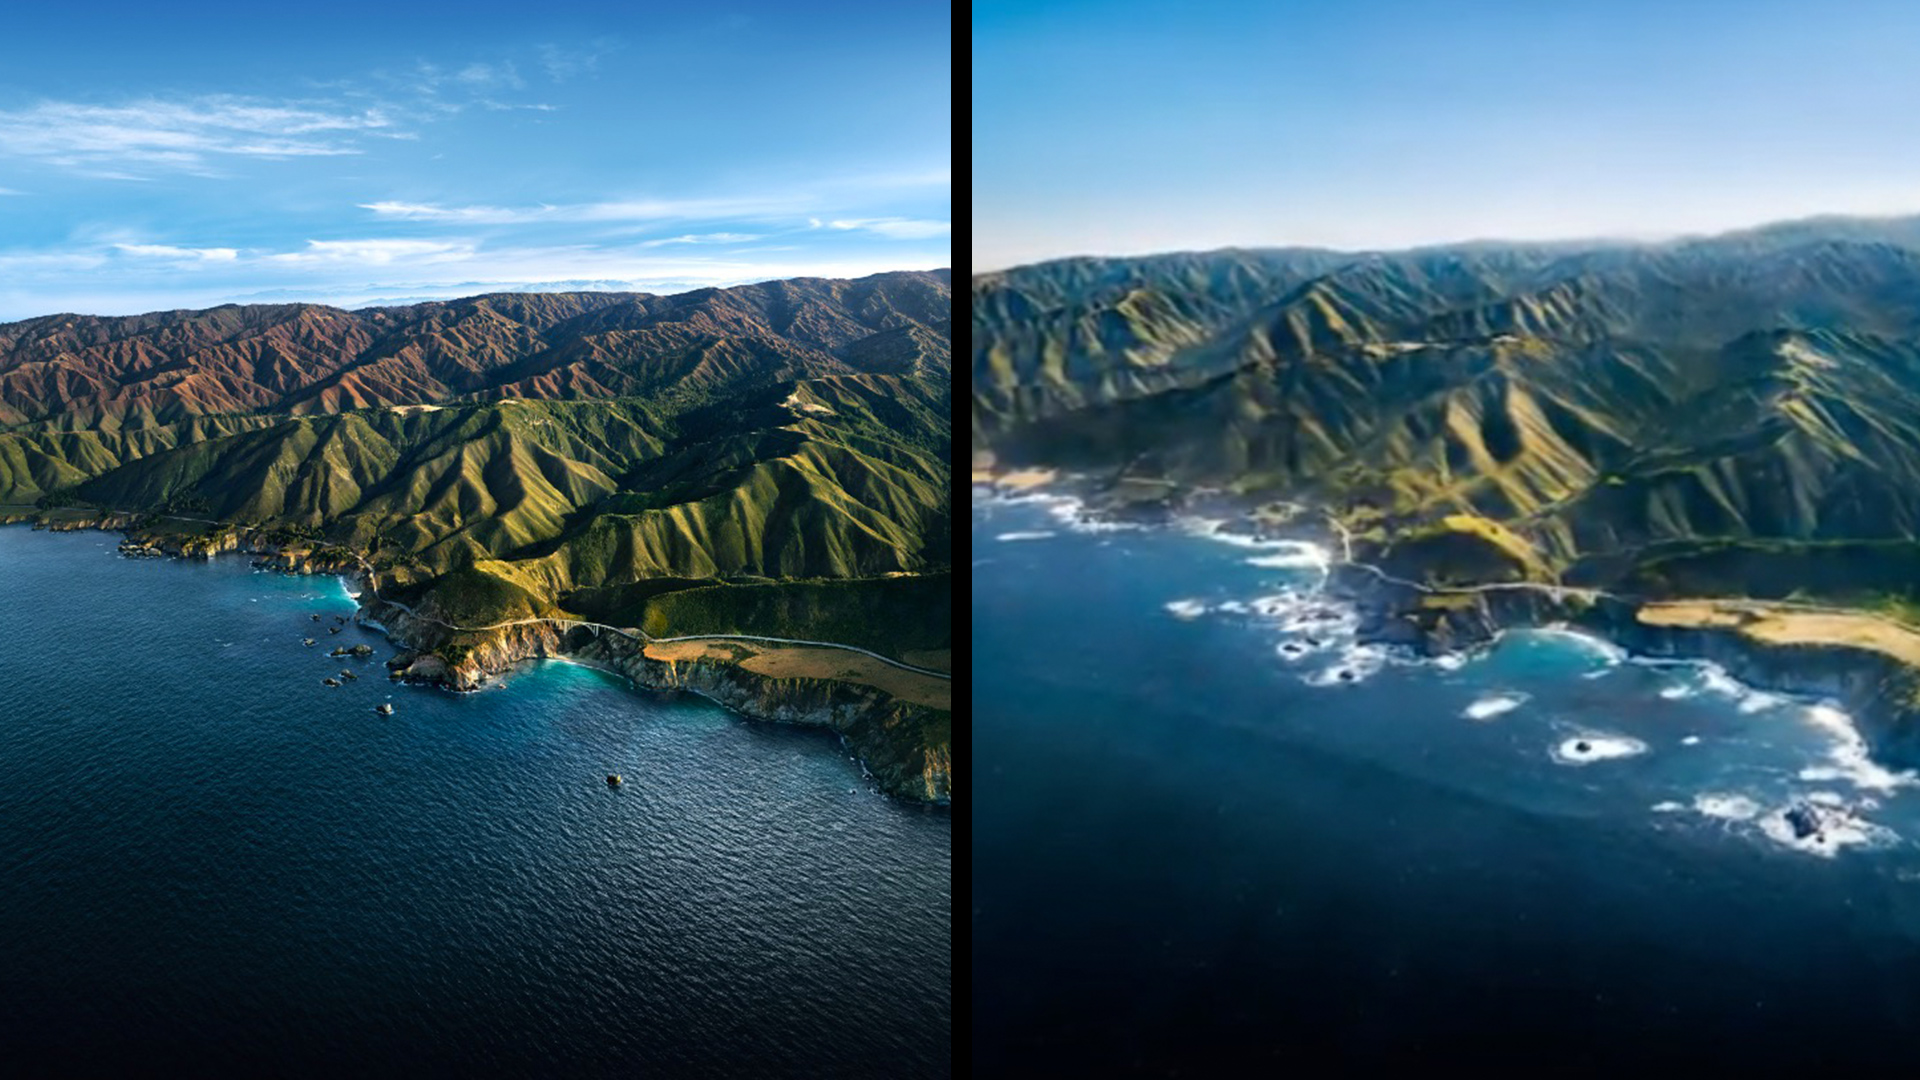 Photographers Go To Great Heights To Recreate Apple's New Wallpaper